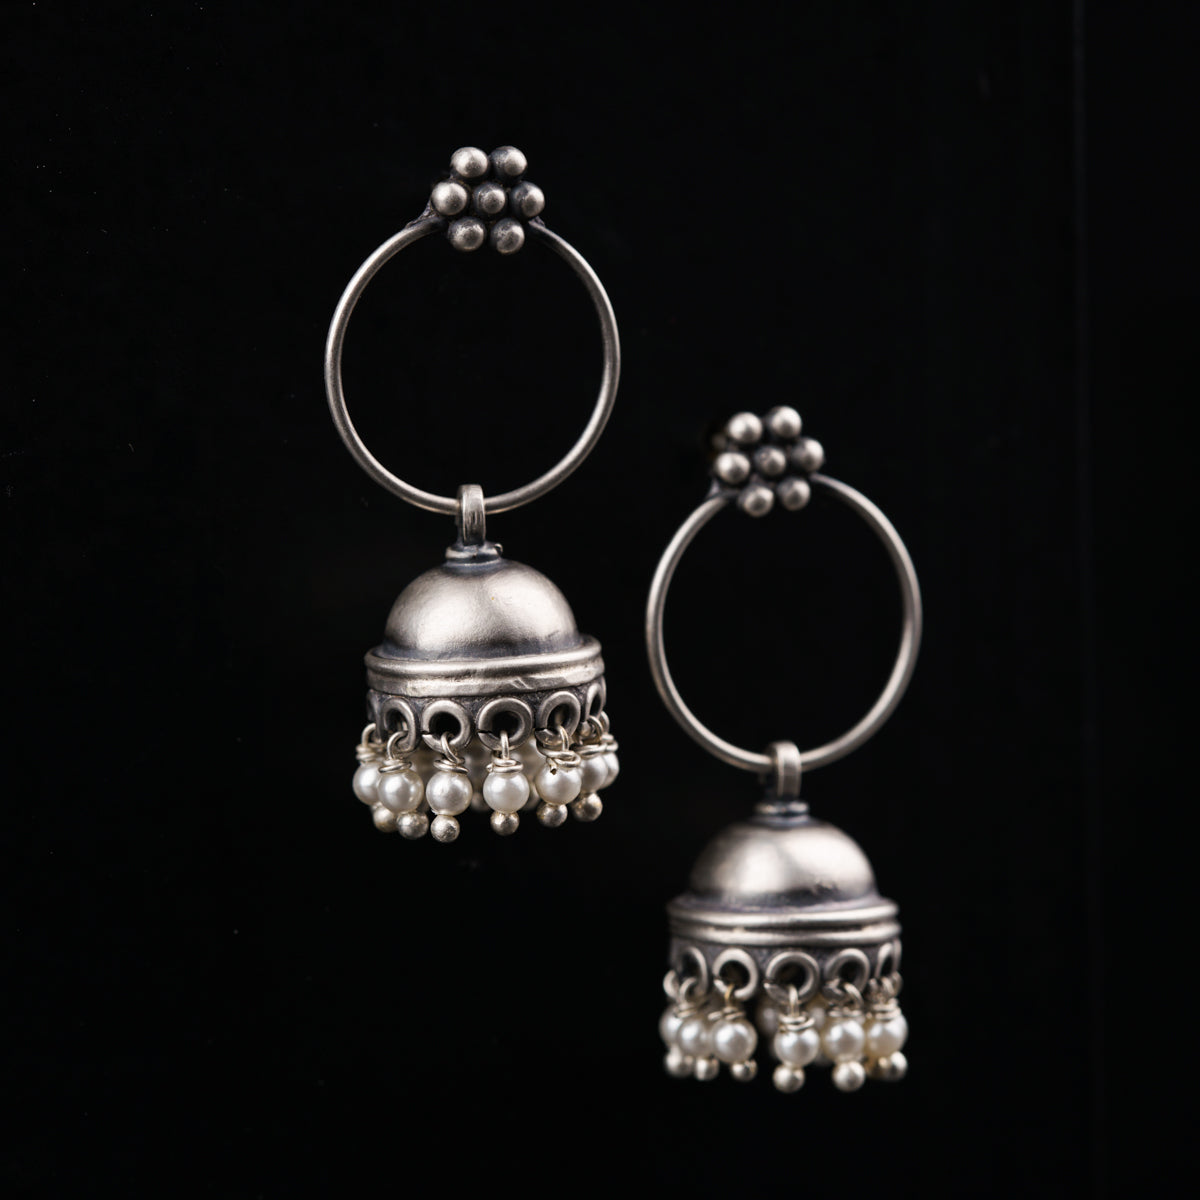 a pair of silver bells on a black background